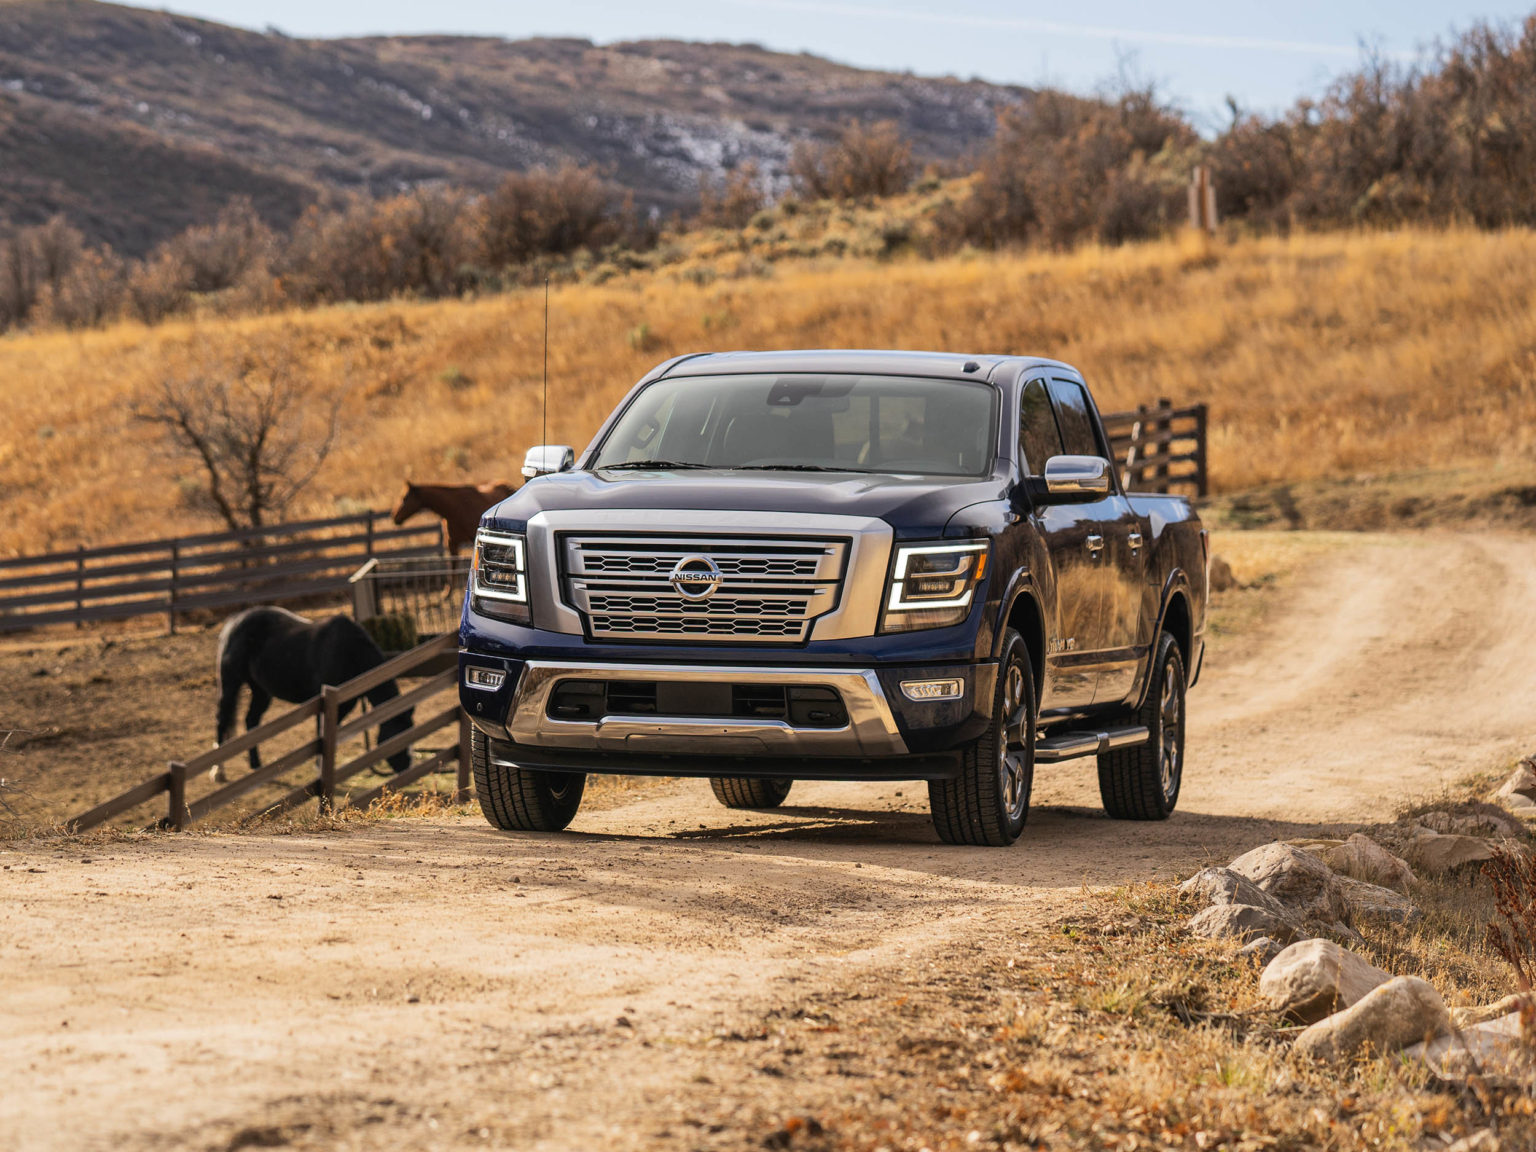 The Nissan Titan will be a carryover for the 2021 model year.